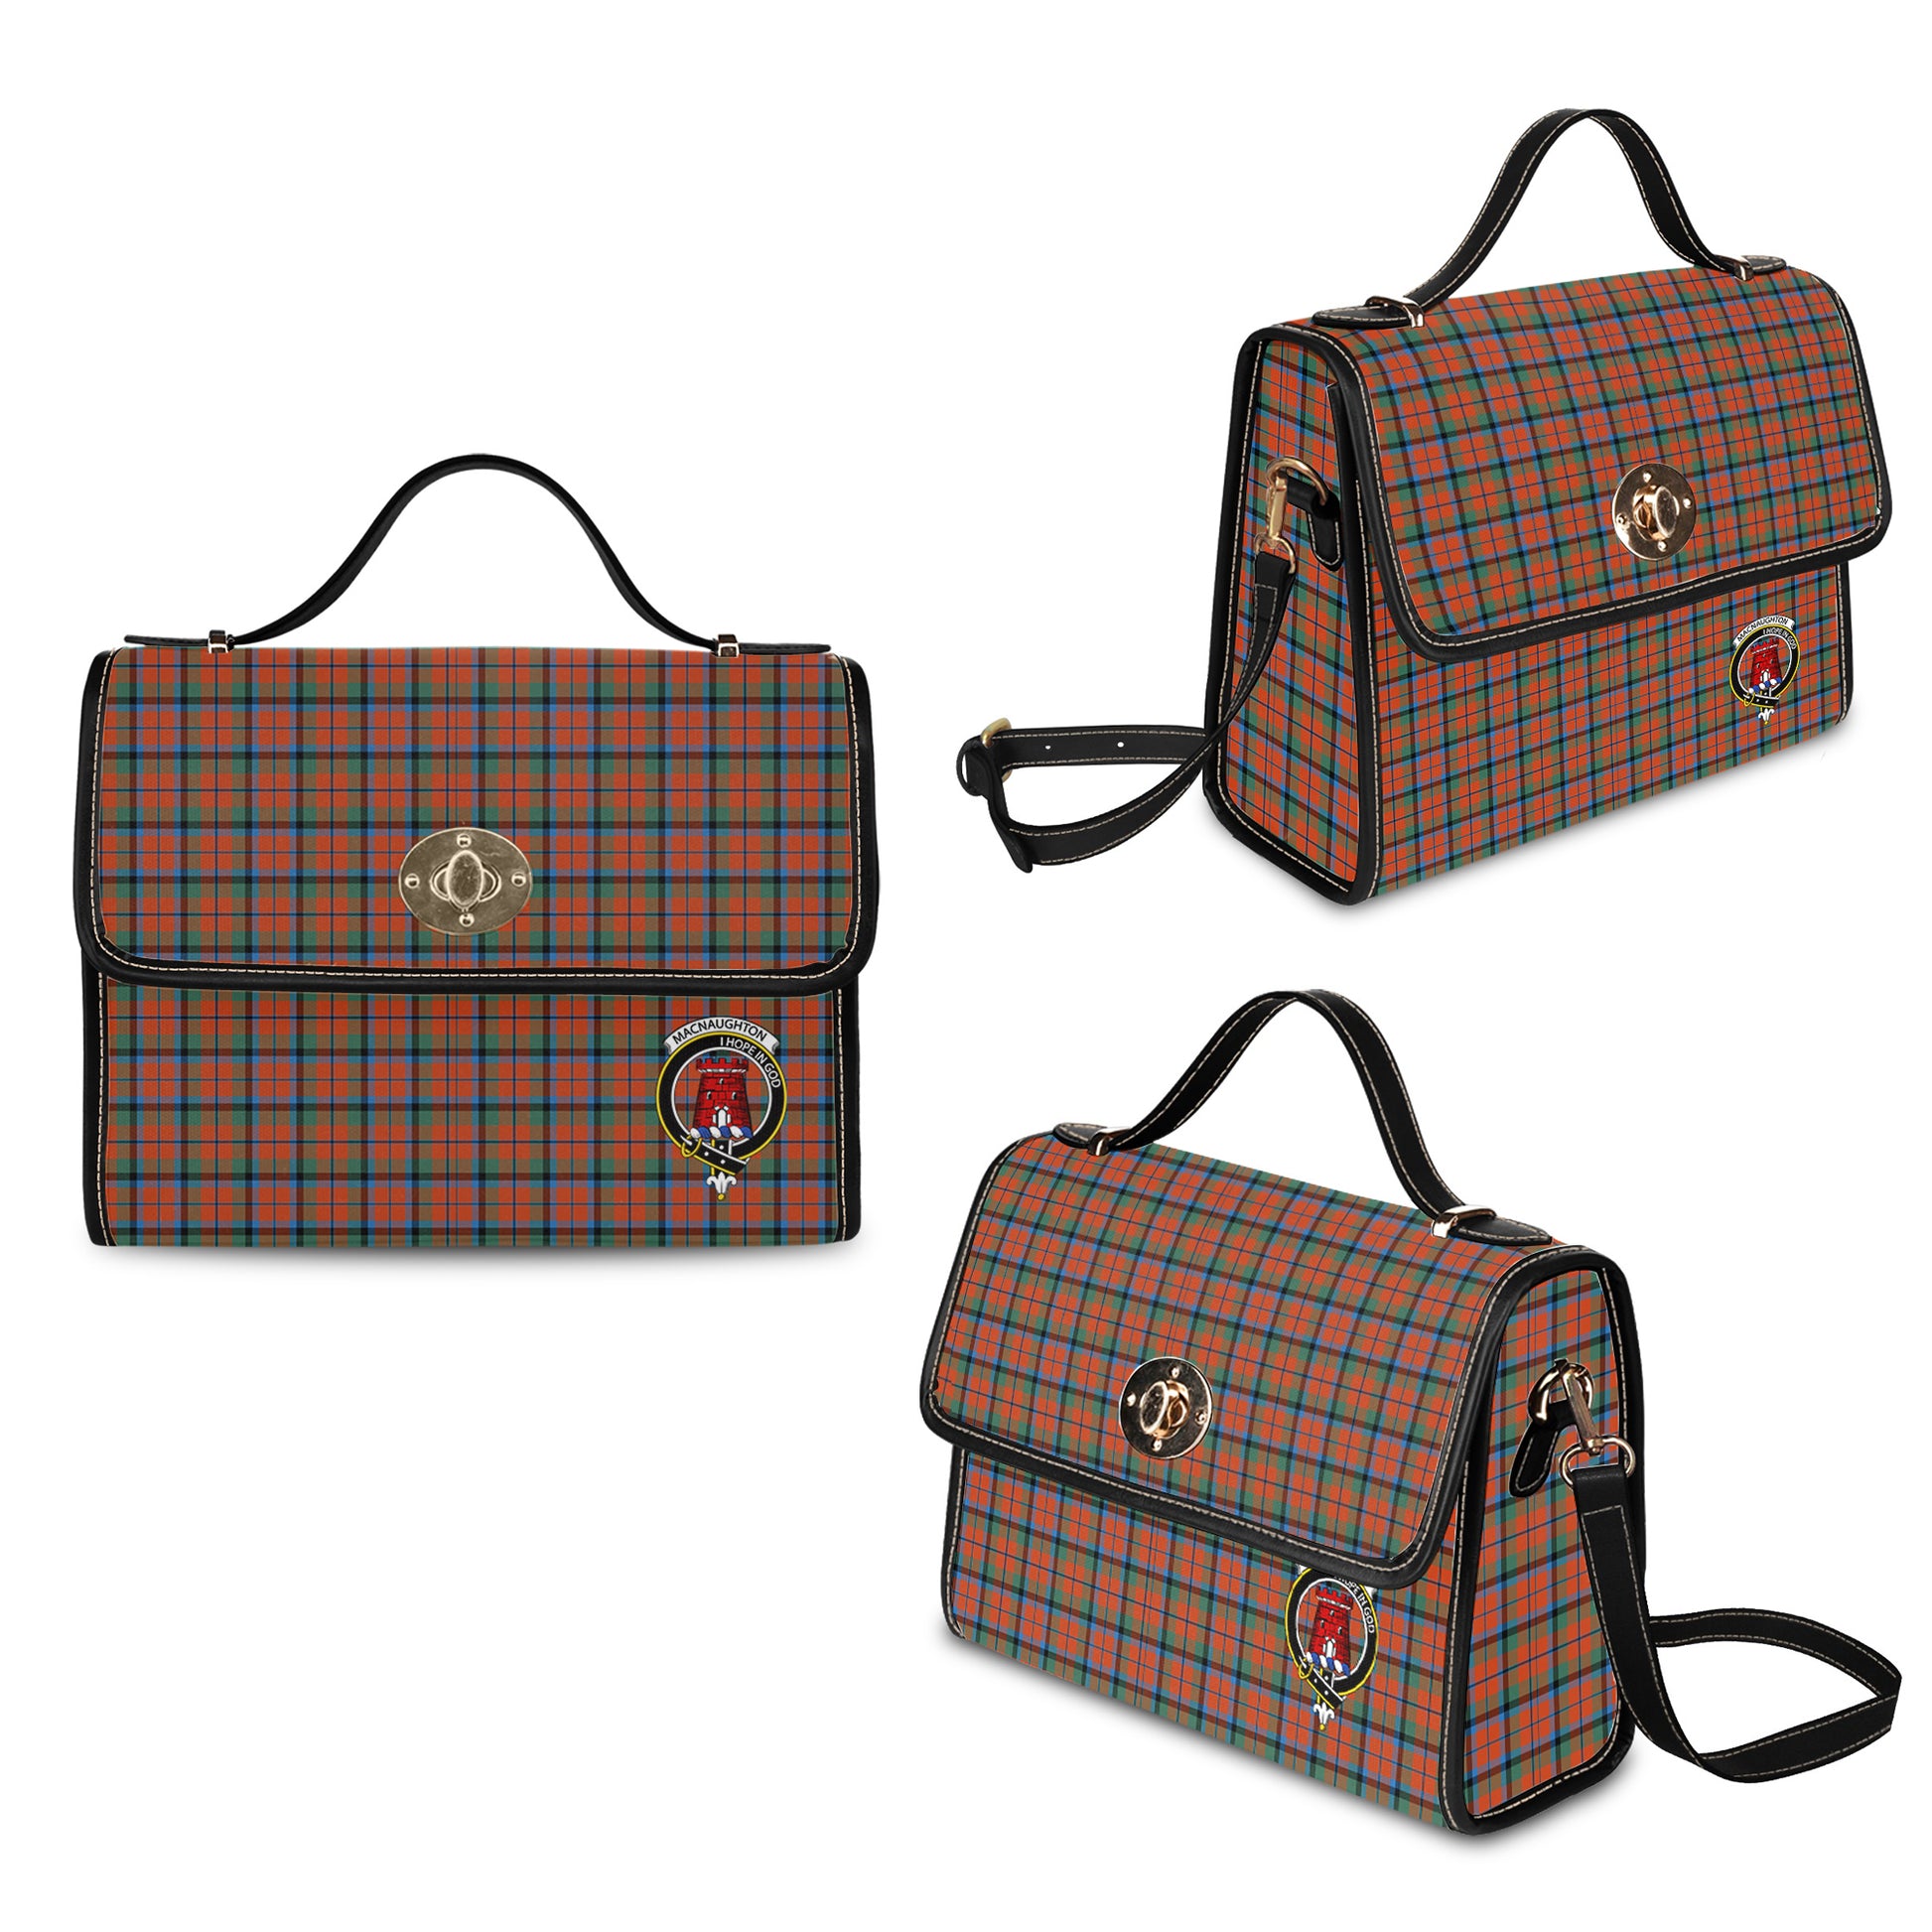 macnaughton-ancient-tartan-leather-strap-waterproof-canvas-bag-with-family-crest